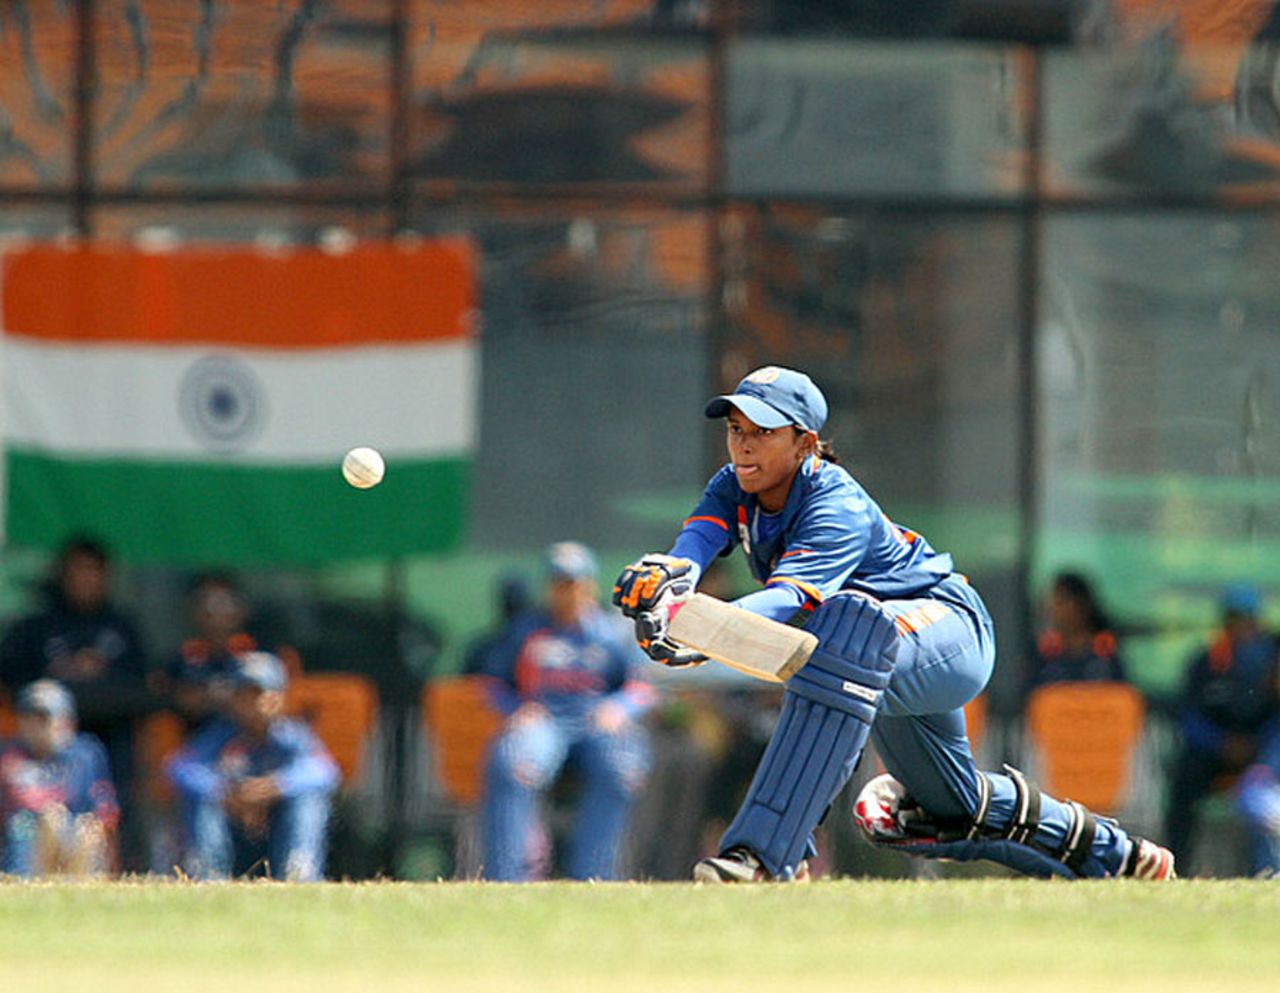 Poonam Raut reverse sweeps, India v Pakistan, final, ACC Women's T20 Asia Cup, Guangzhou, October 31, 2012